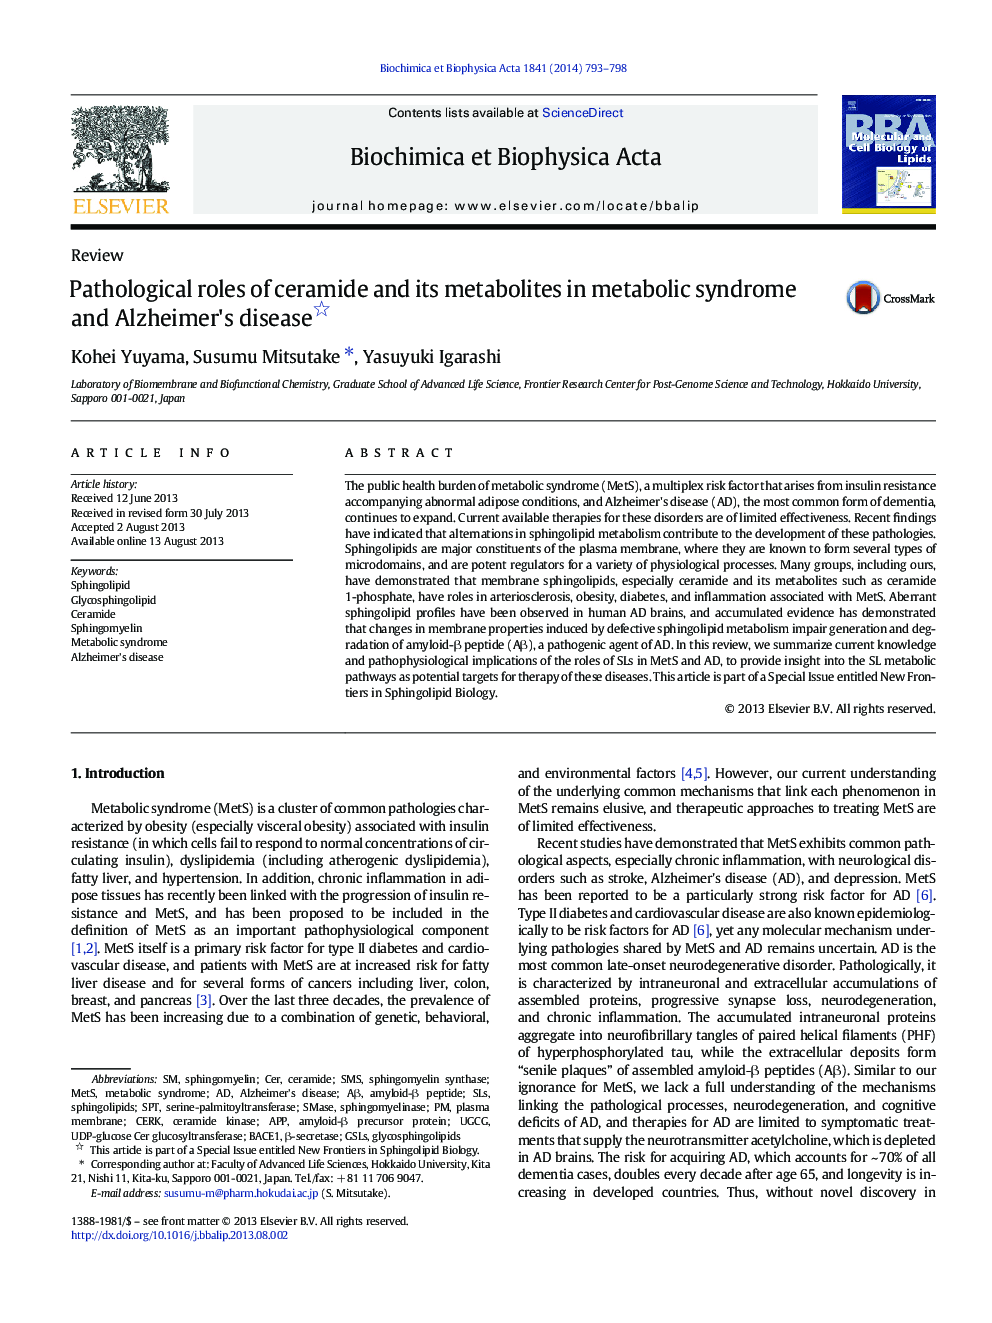 Pathological roles of ceramide and its metabolites in metabolic syndrome and Alzheimer's disease 